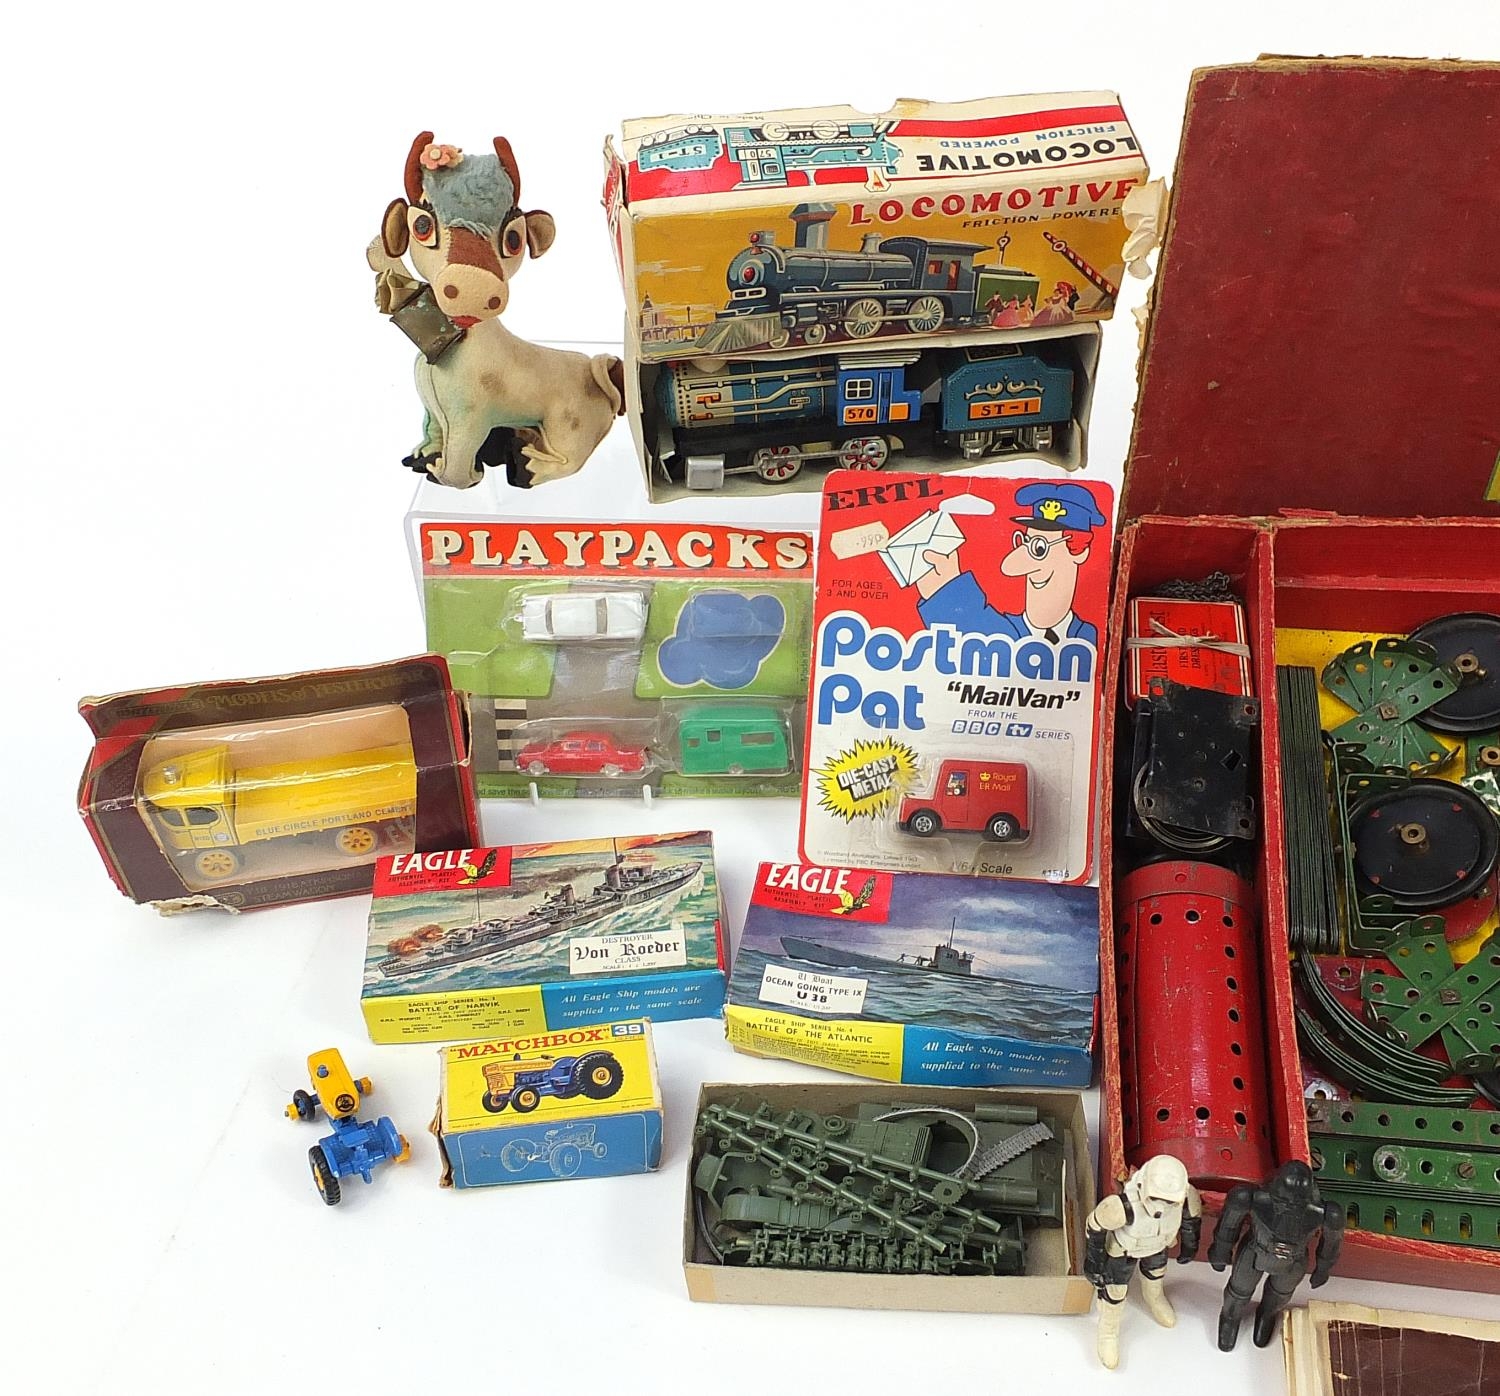 Vintage and later toys including Revell model ship kits, Star Wars figures and diecast vehicles - Image 2 of 4